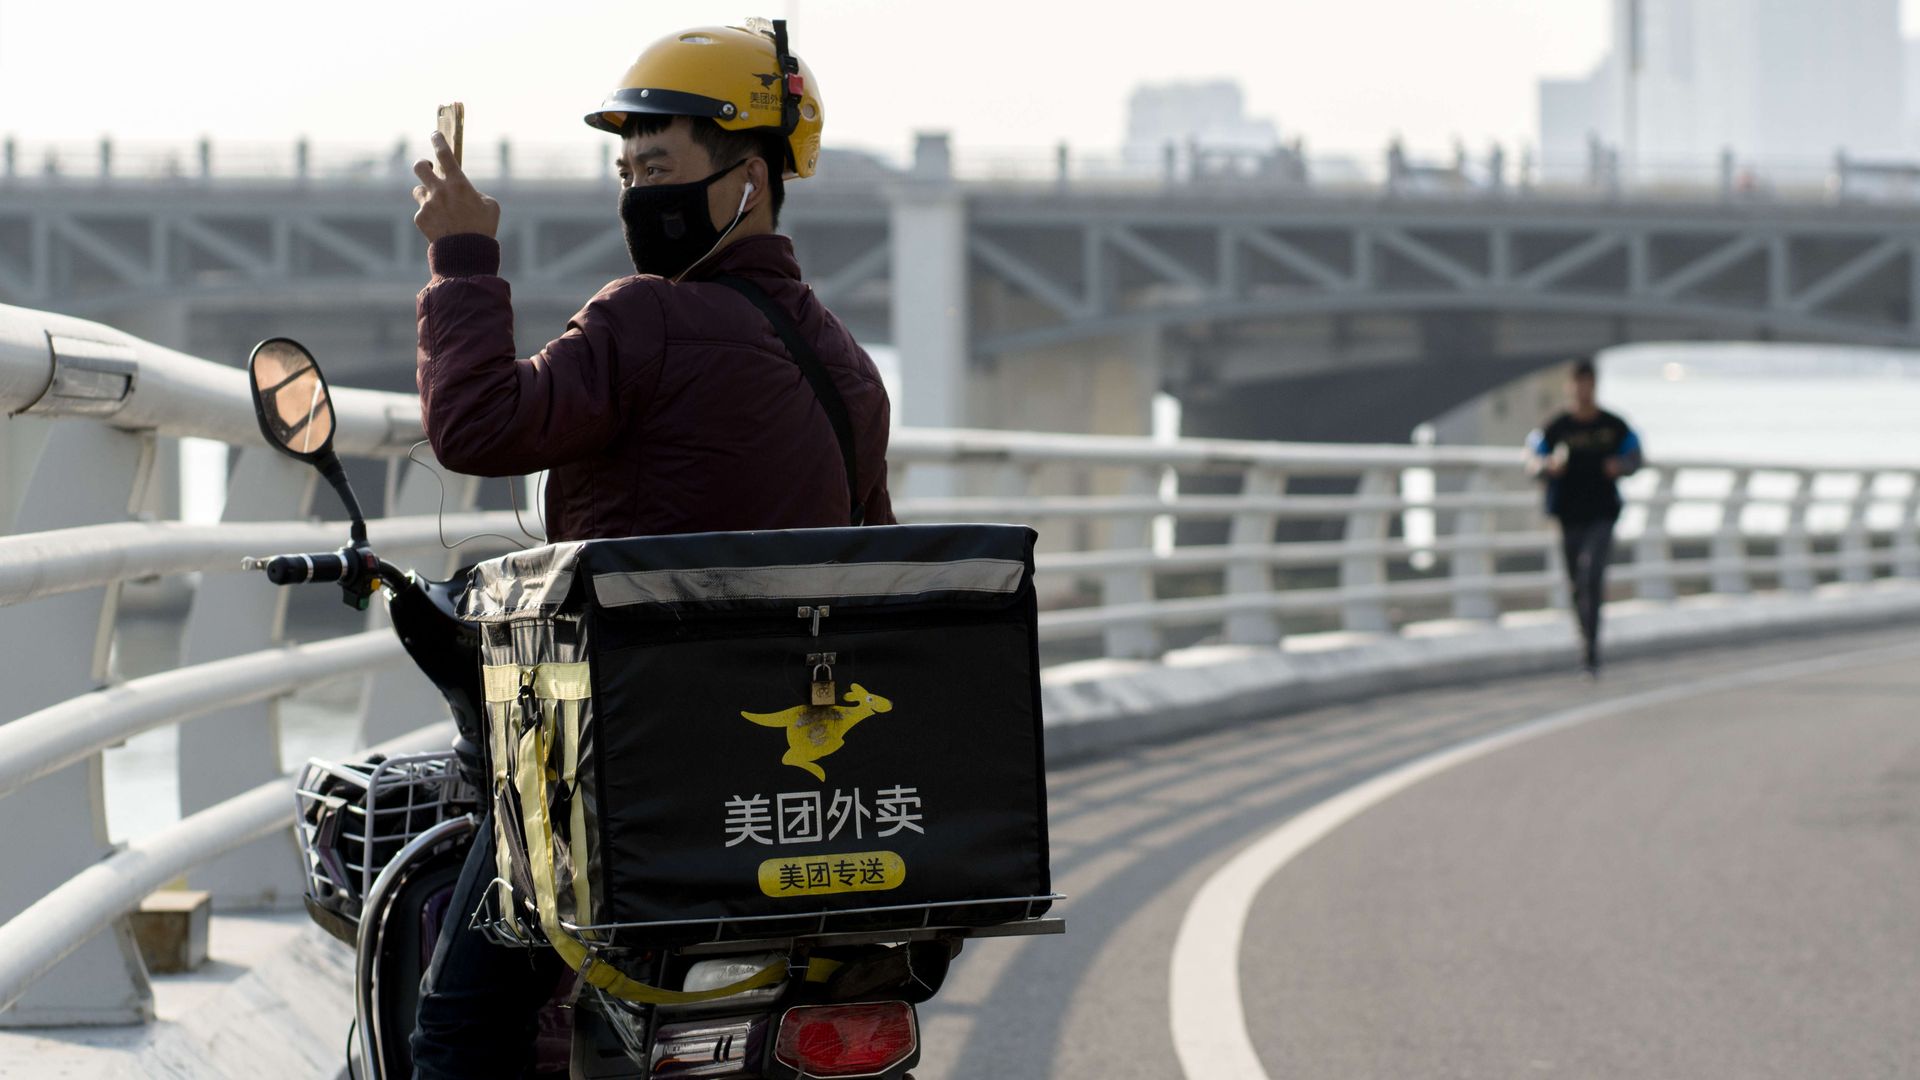 Chinese delivery guy on motorbike